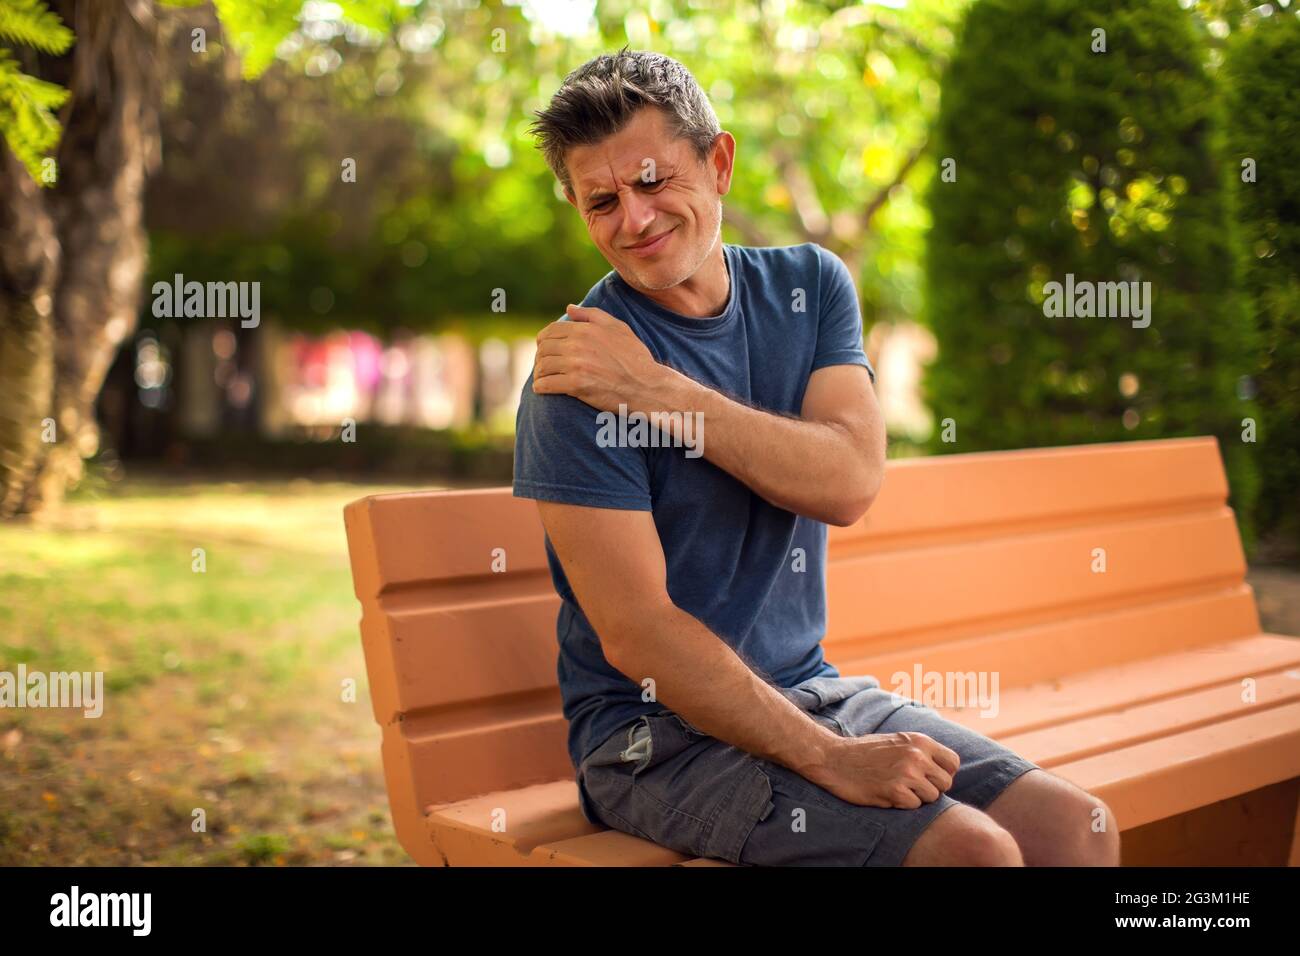 Man with shoulder pain sitting on the bench in the park. Healthcare and medicine concept Stock Photo